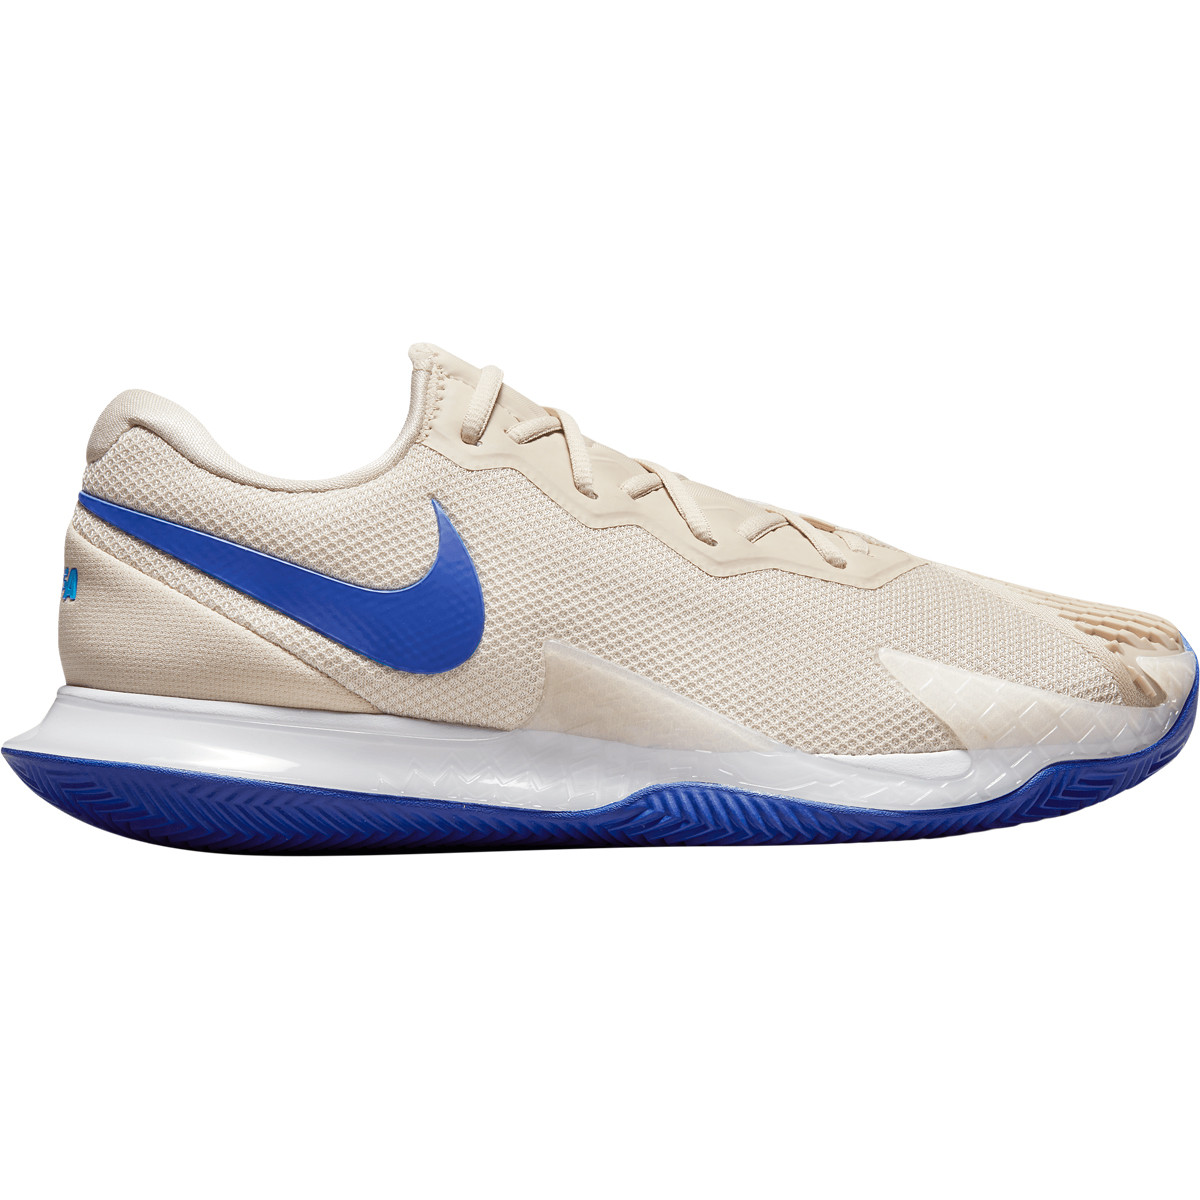 NIKE AIR ZOOM CAGE 4 NADAL PARIS CLAY COURT SHOES - NIKE - Juniors - Shoes | Tennispro